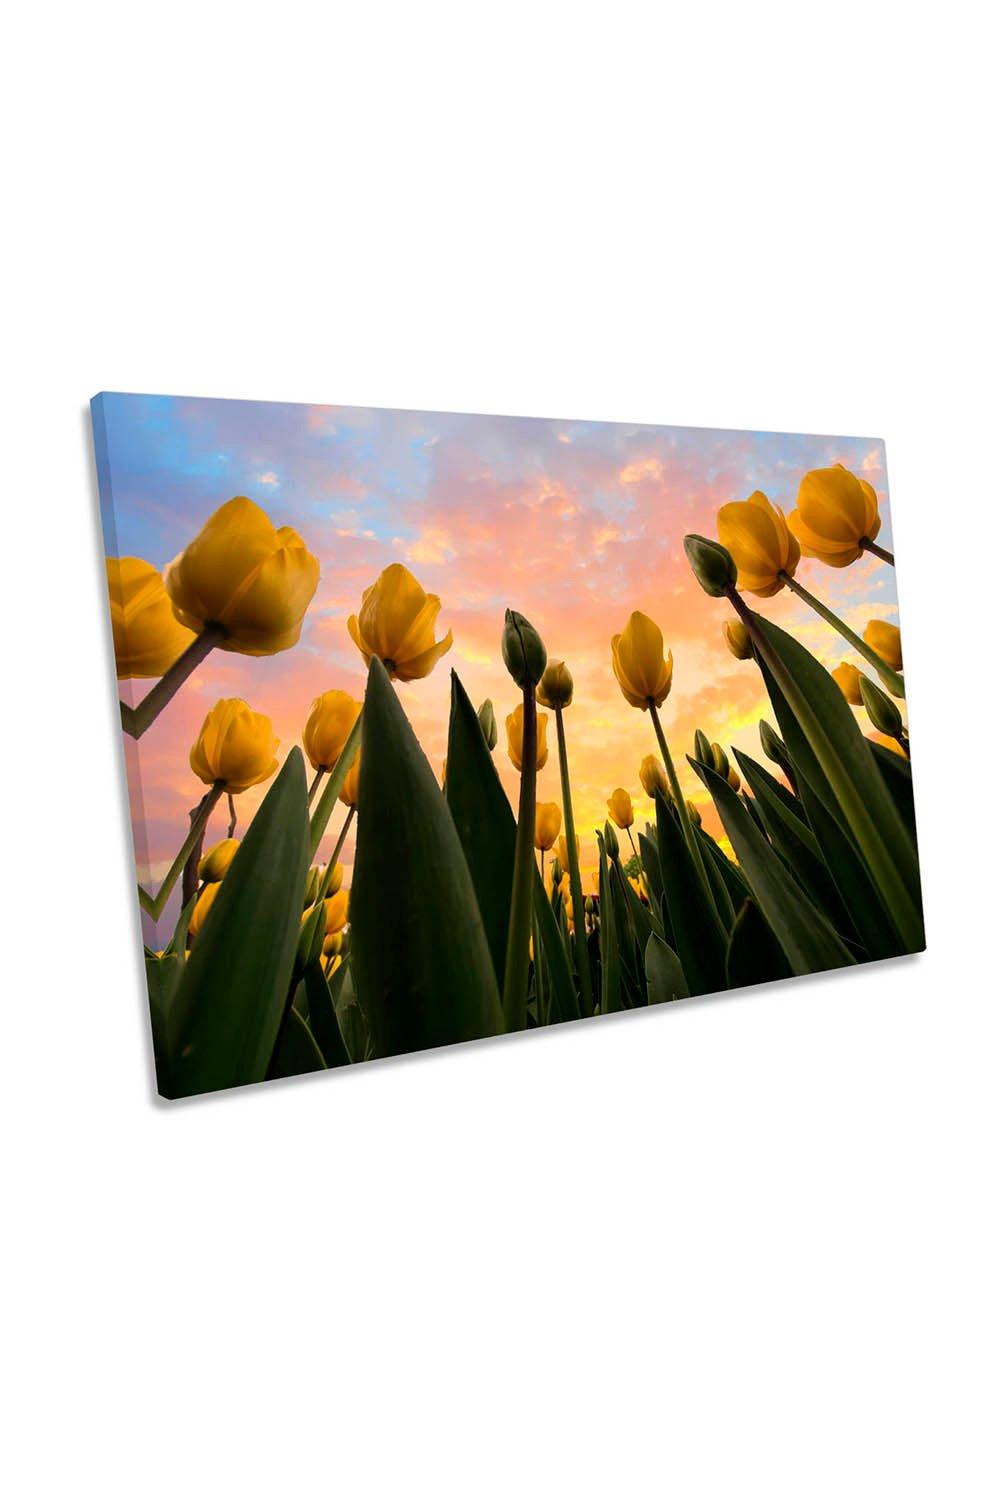 Yellow Tulip Flowers Sunset Canvas Wall Art Picture Print